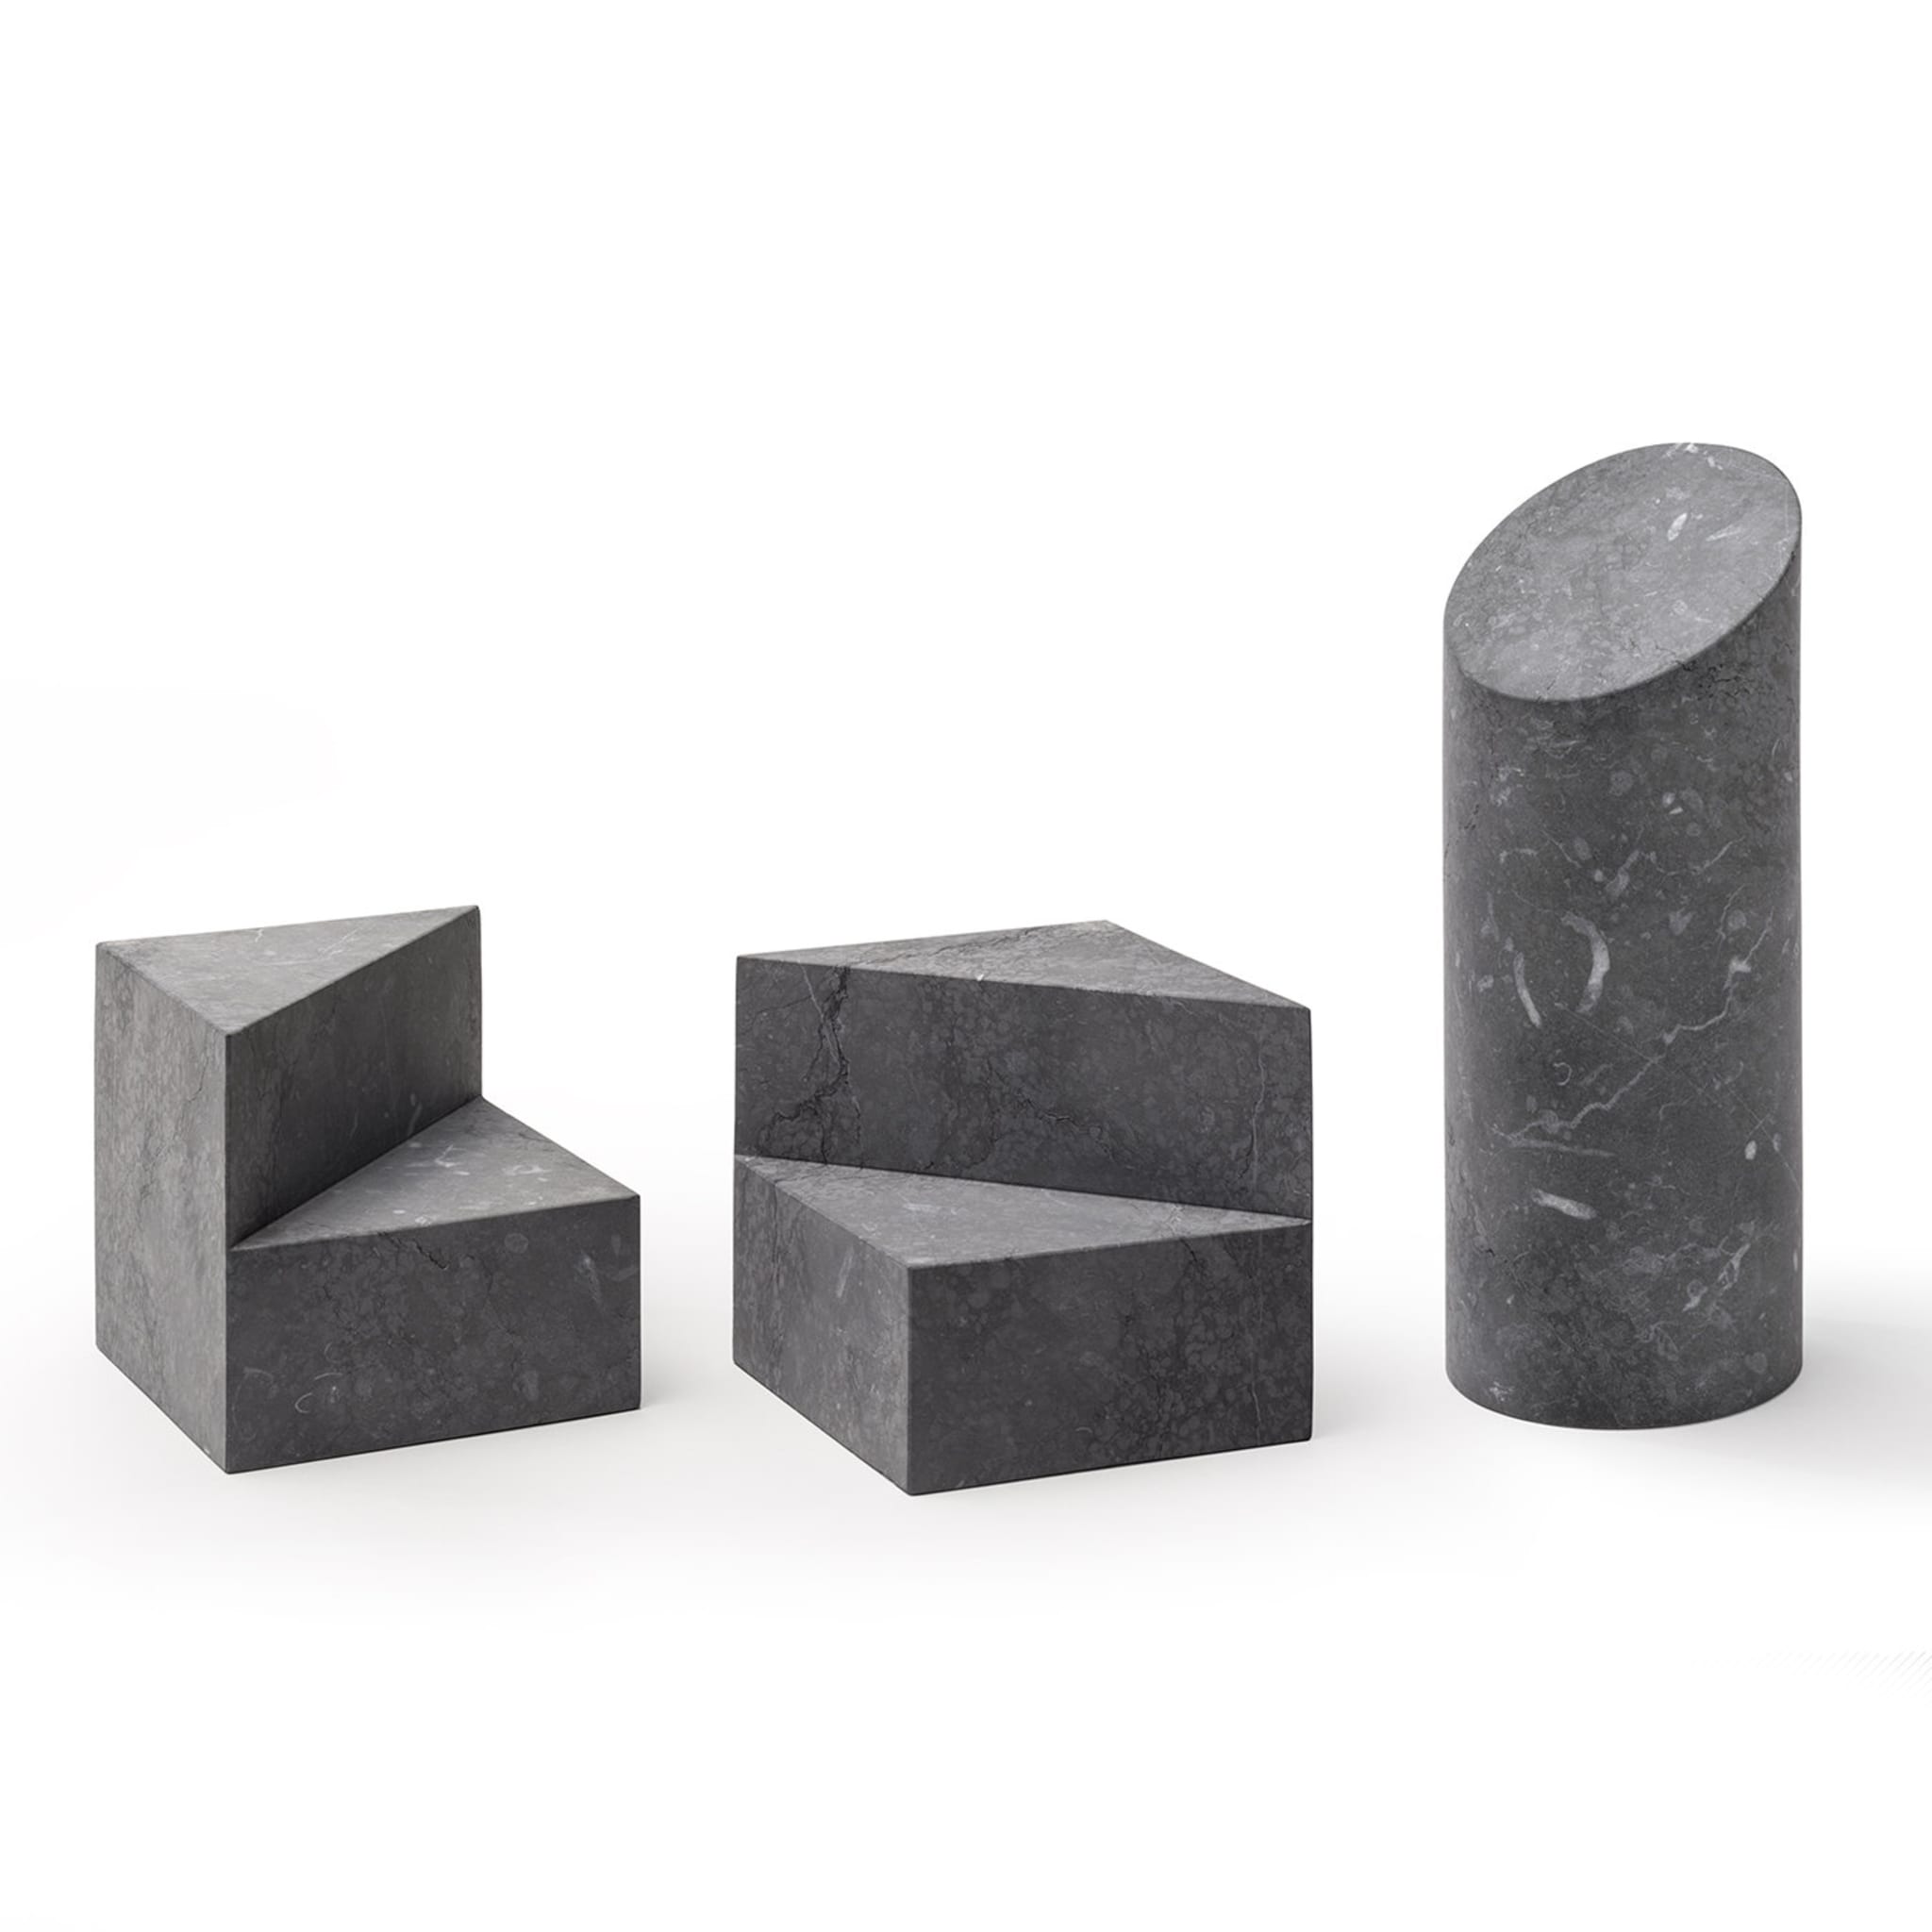 Kilos Black Cylinder Bookend by Elisa Ossino - Alternative view 2